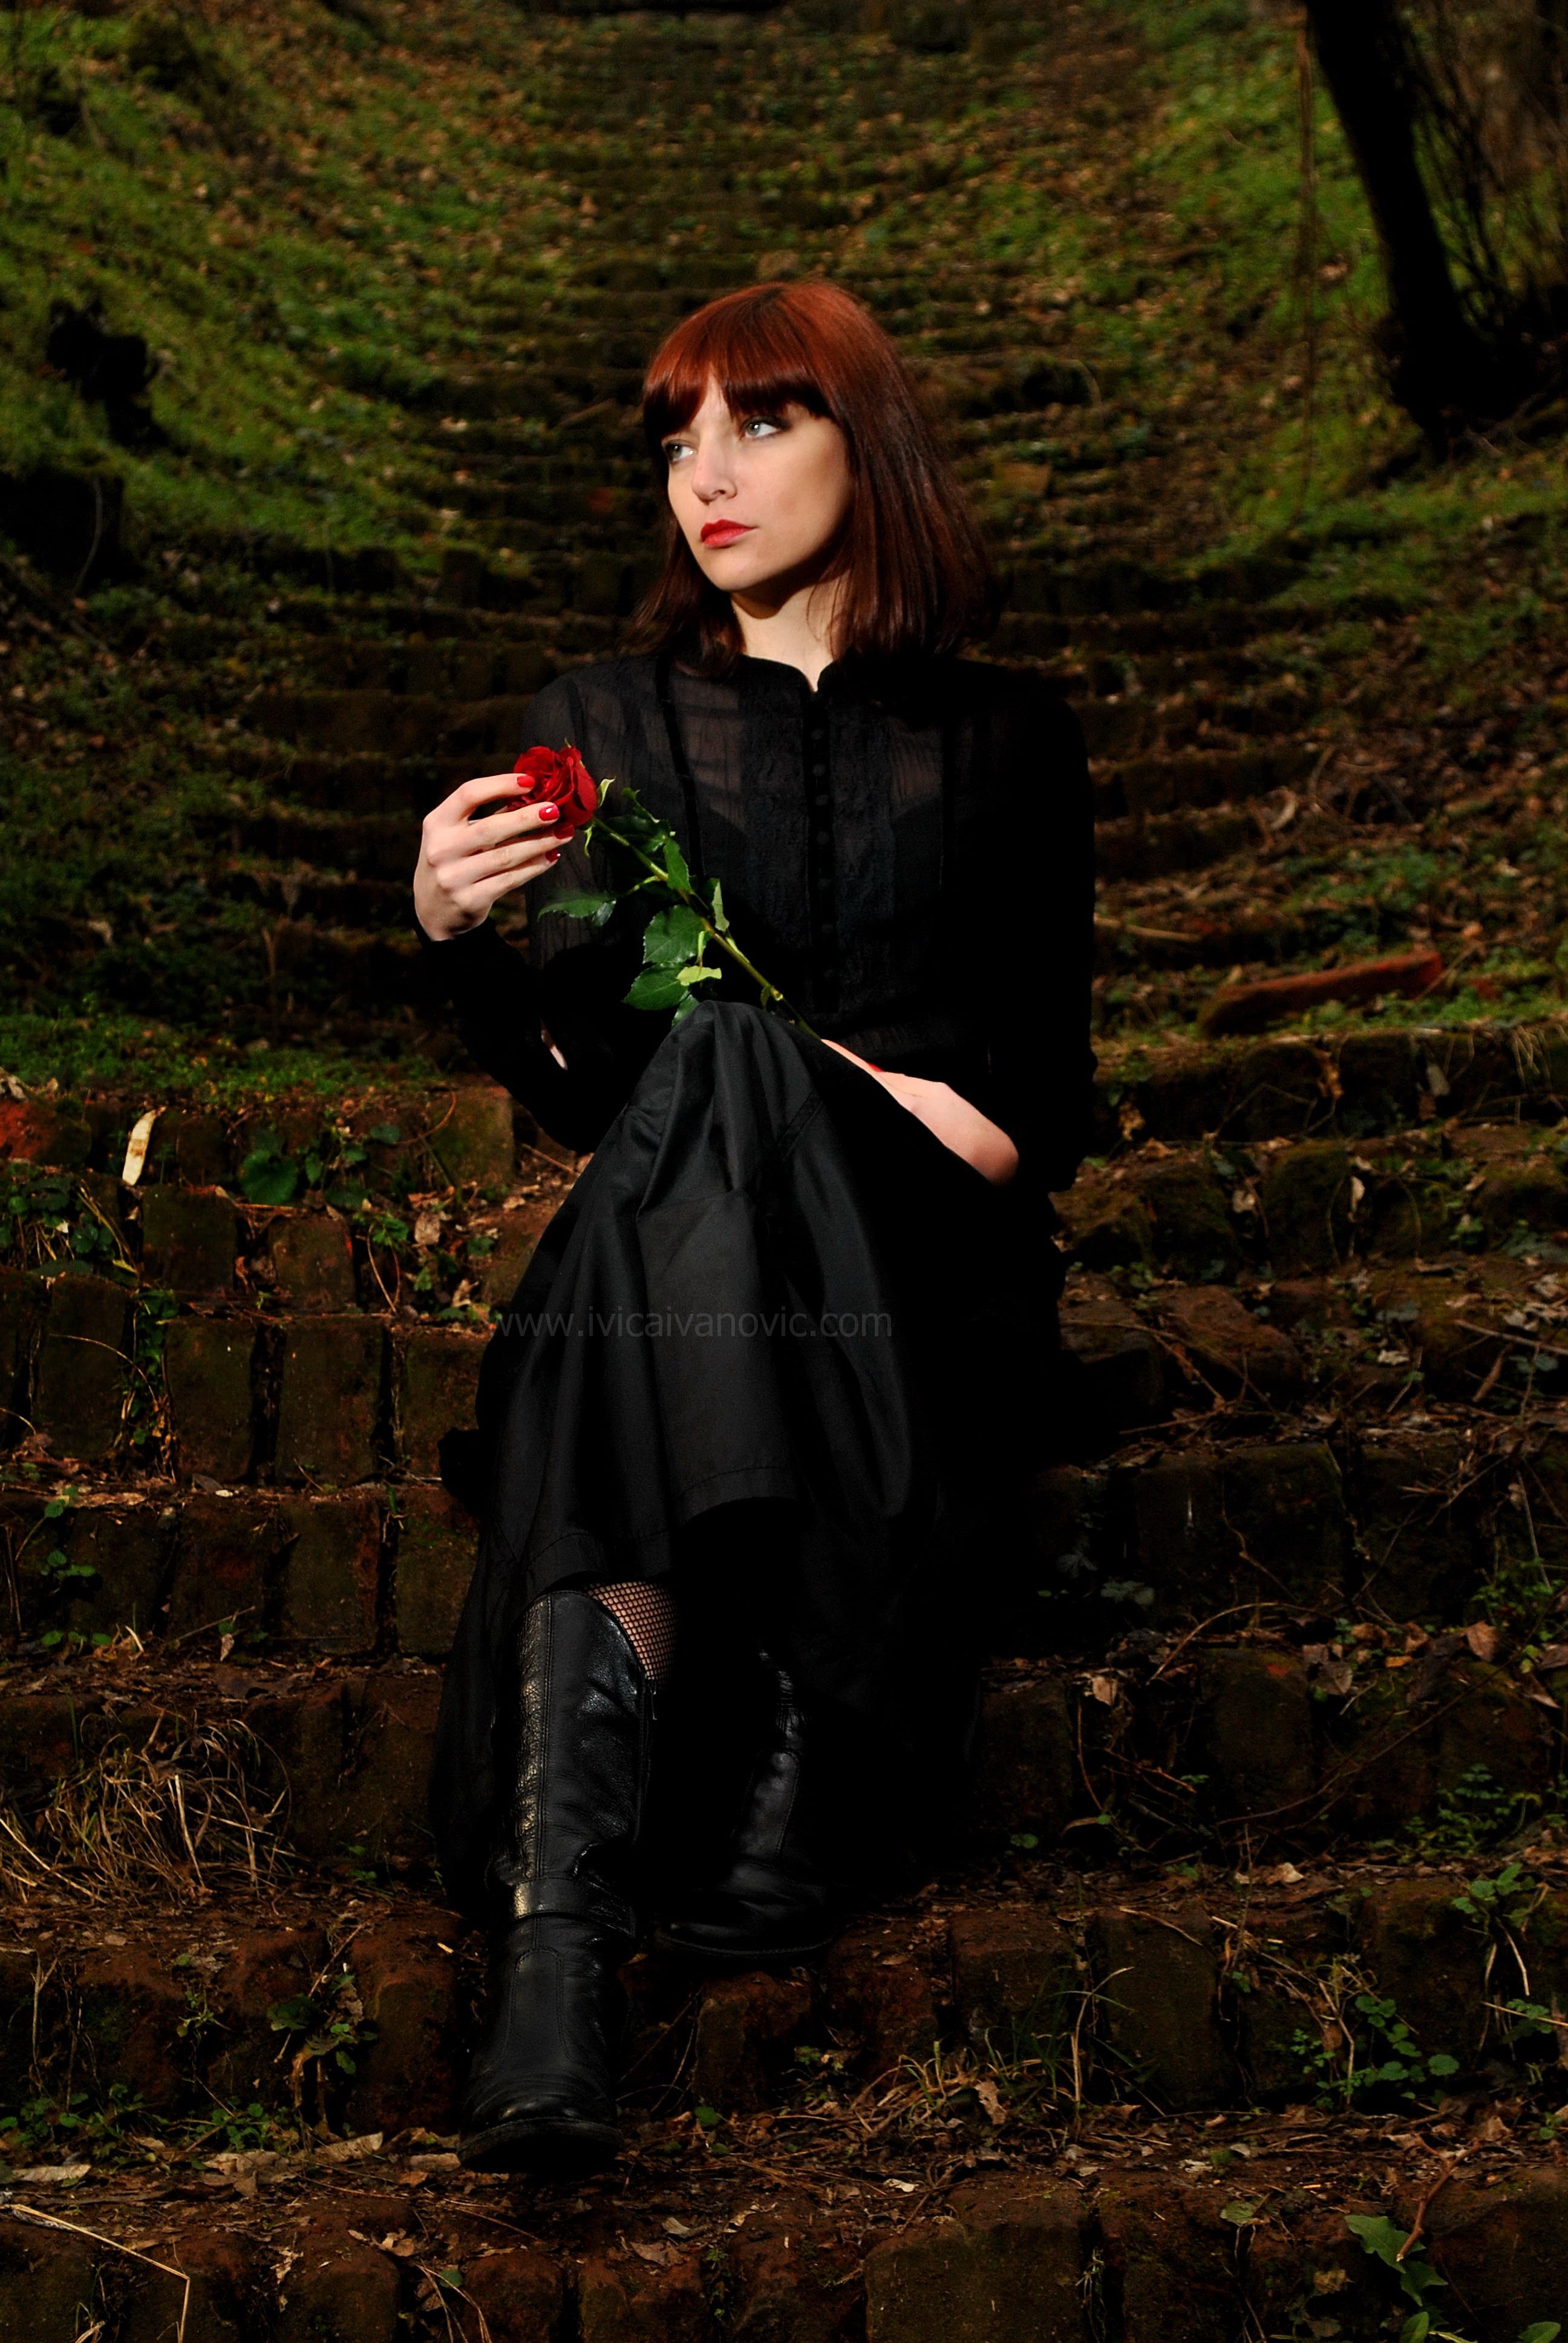 Model, gothic, red hair, red rose, black dress, fashion, beauty, mood